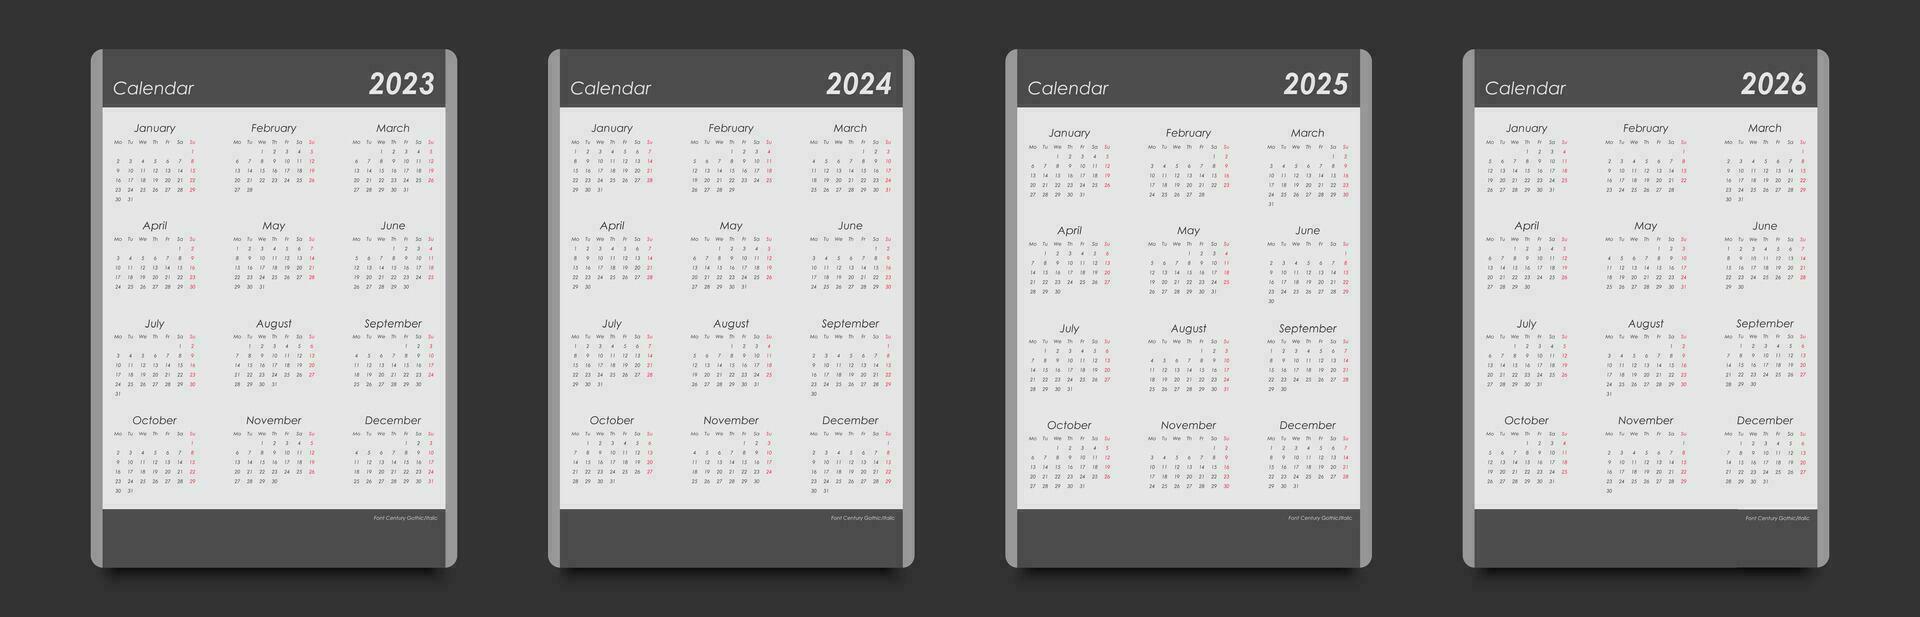 Calendar set for 2023, 2024, 2025, 2026. Vertical, black and white, week starts on Monday. vector